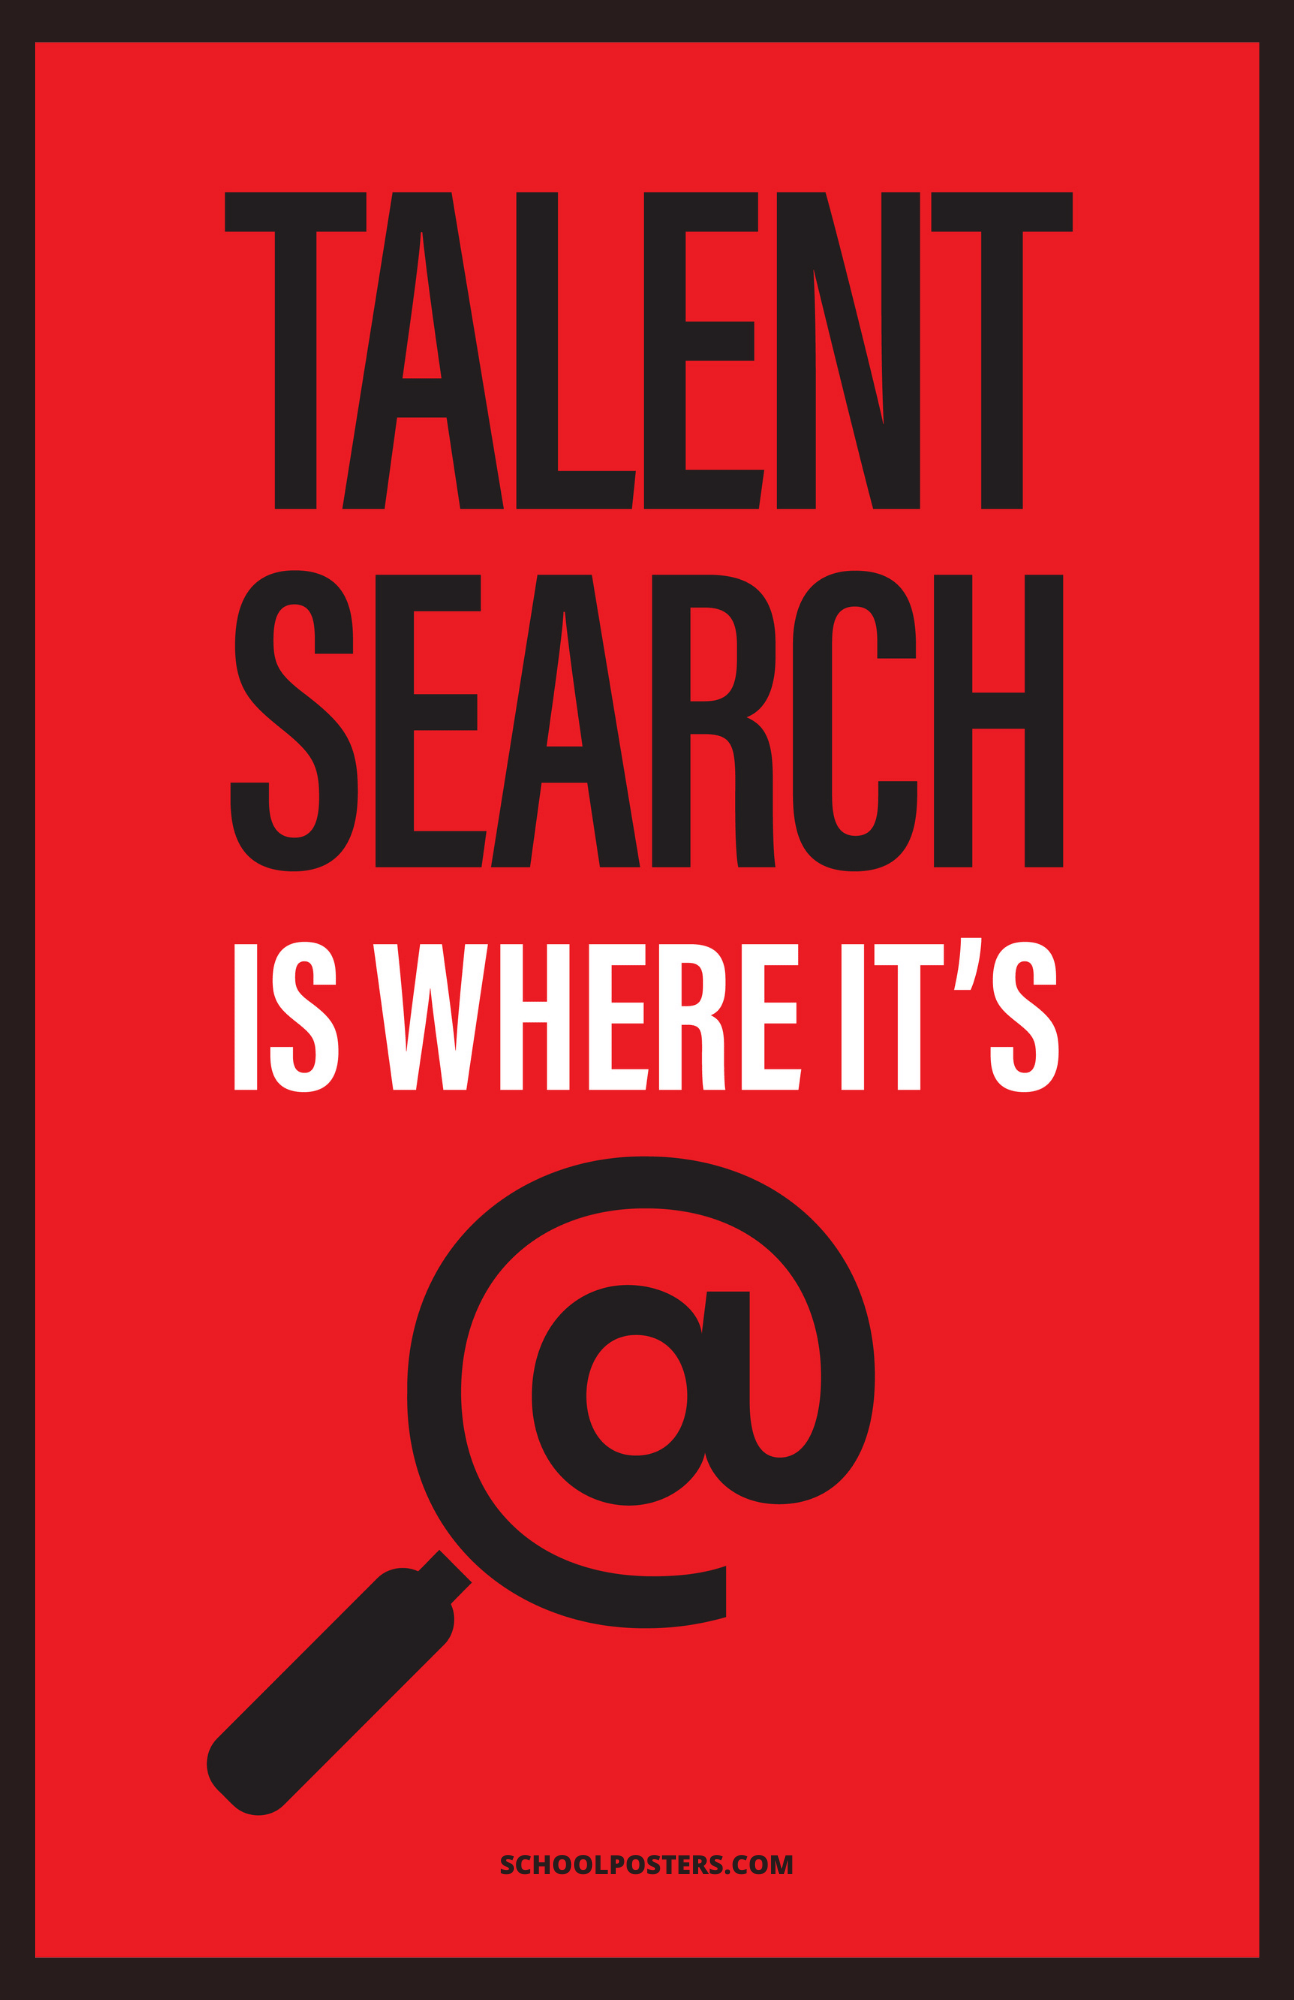 TRIO Talent Search Is Where It's At Poster